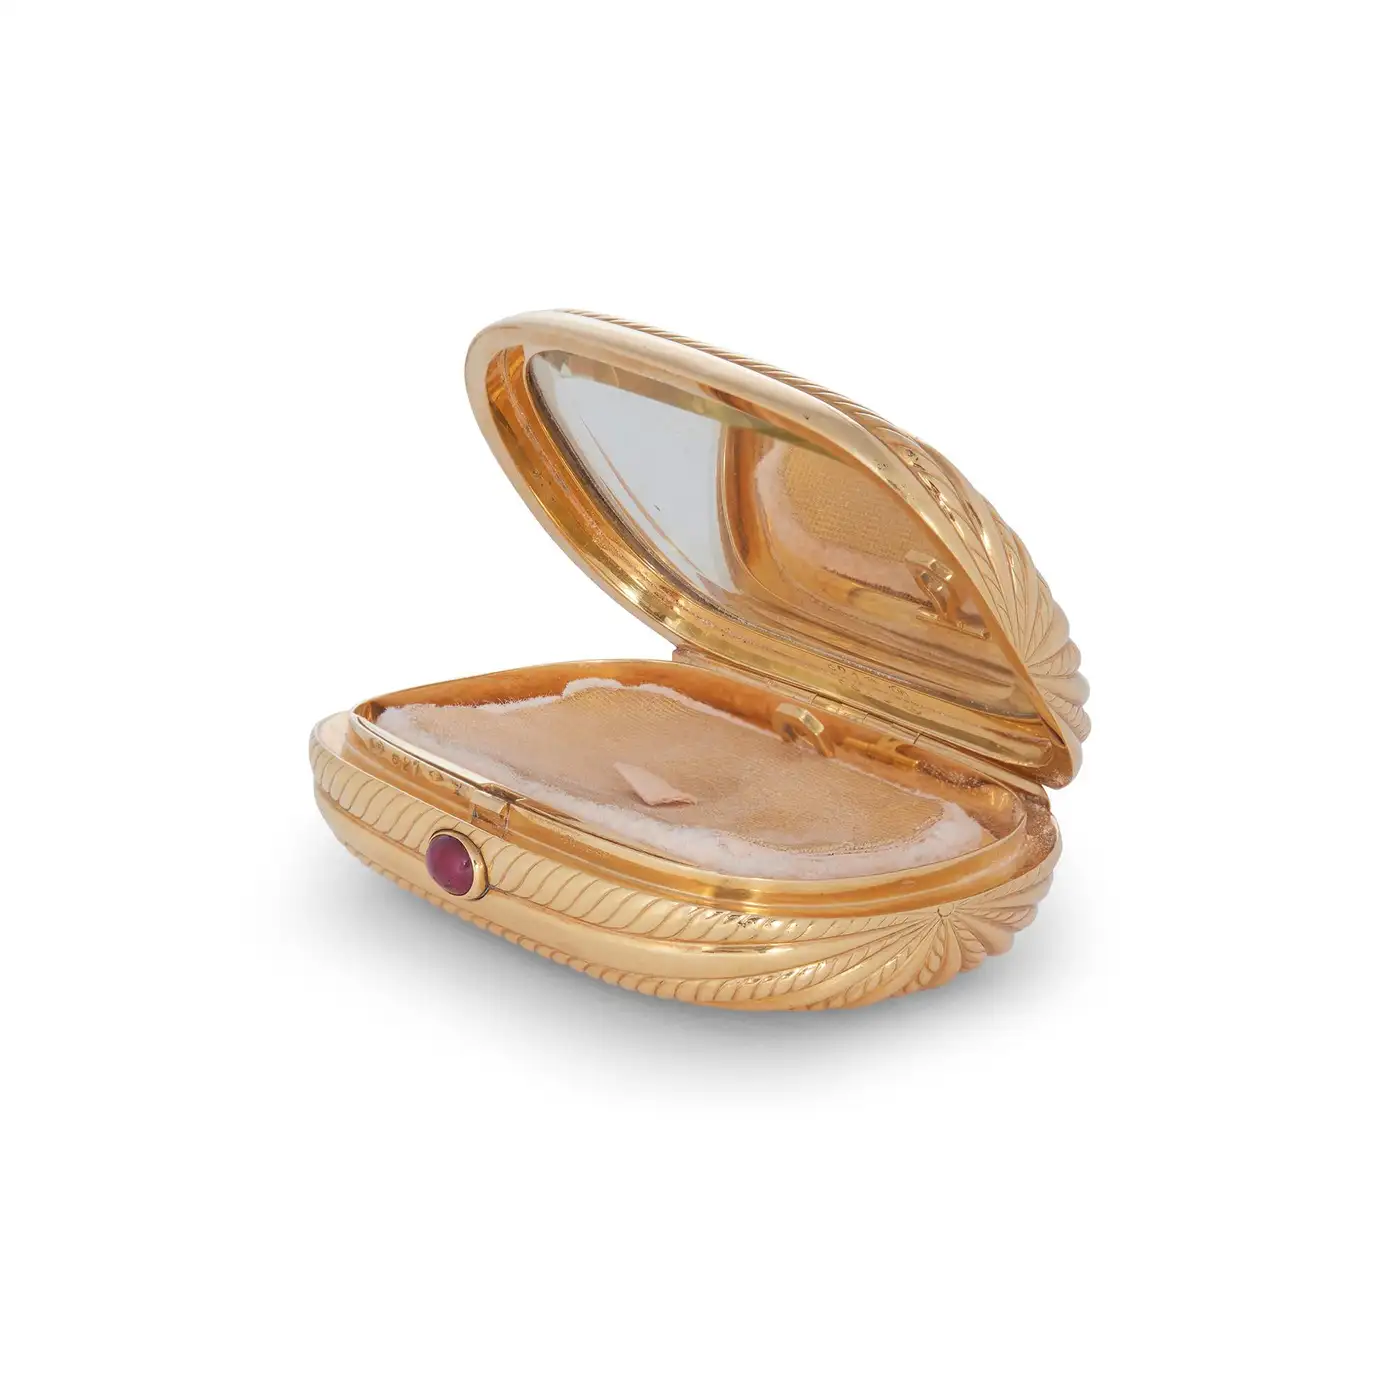 Bvlgari-Gold-and-Ruby-Compact-Case-Circa-1960s-5.webp